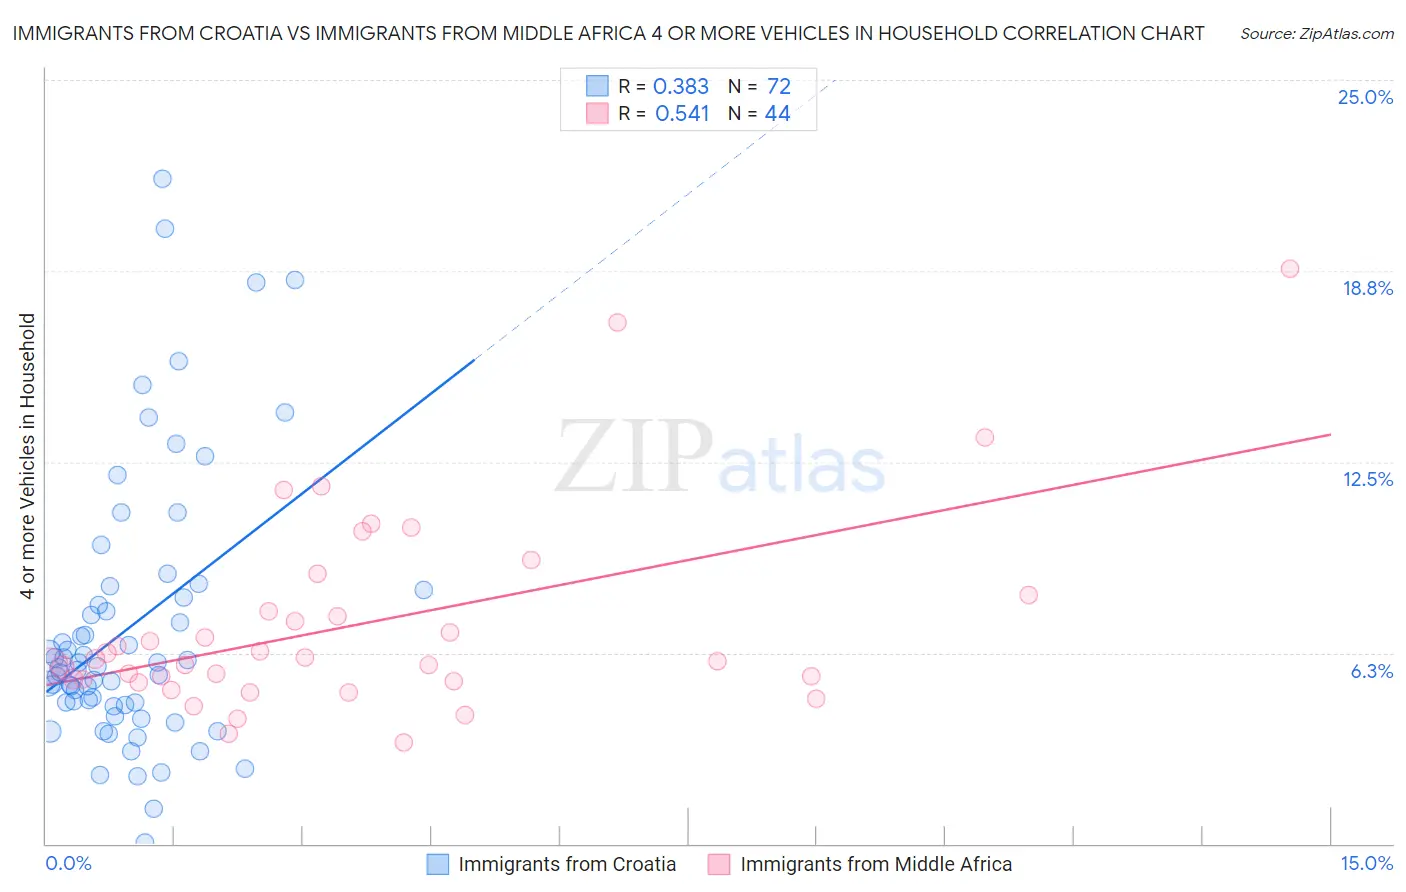 Immigrants from Croatia vs Immigrants from Middle Africa 4 or more Vehicles in Household